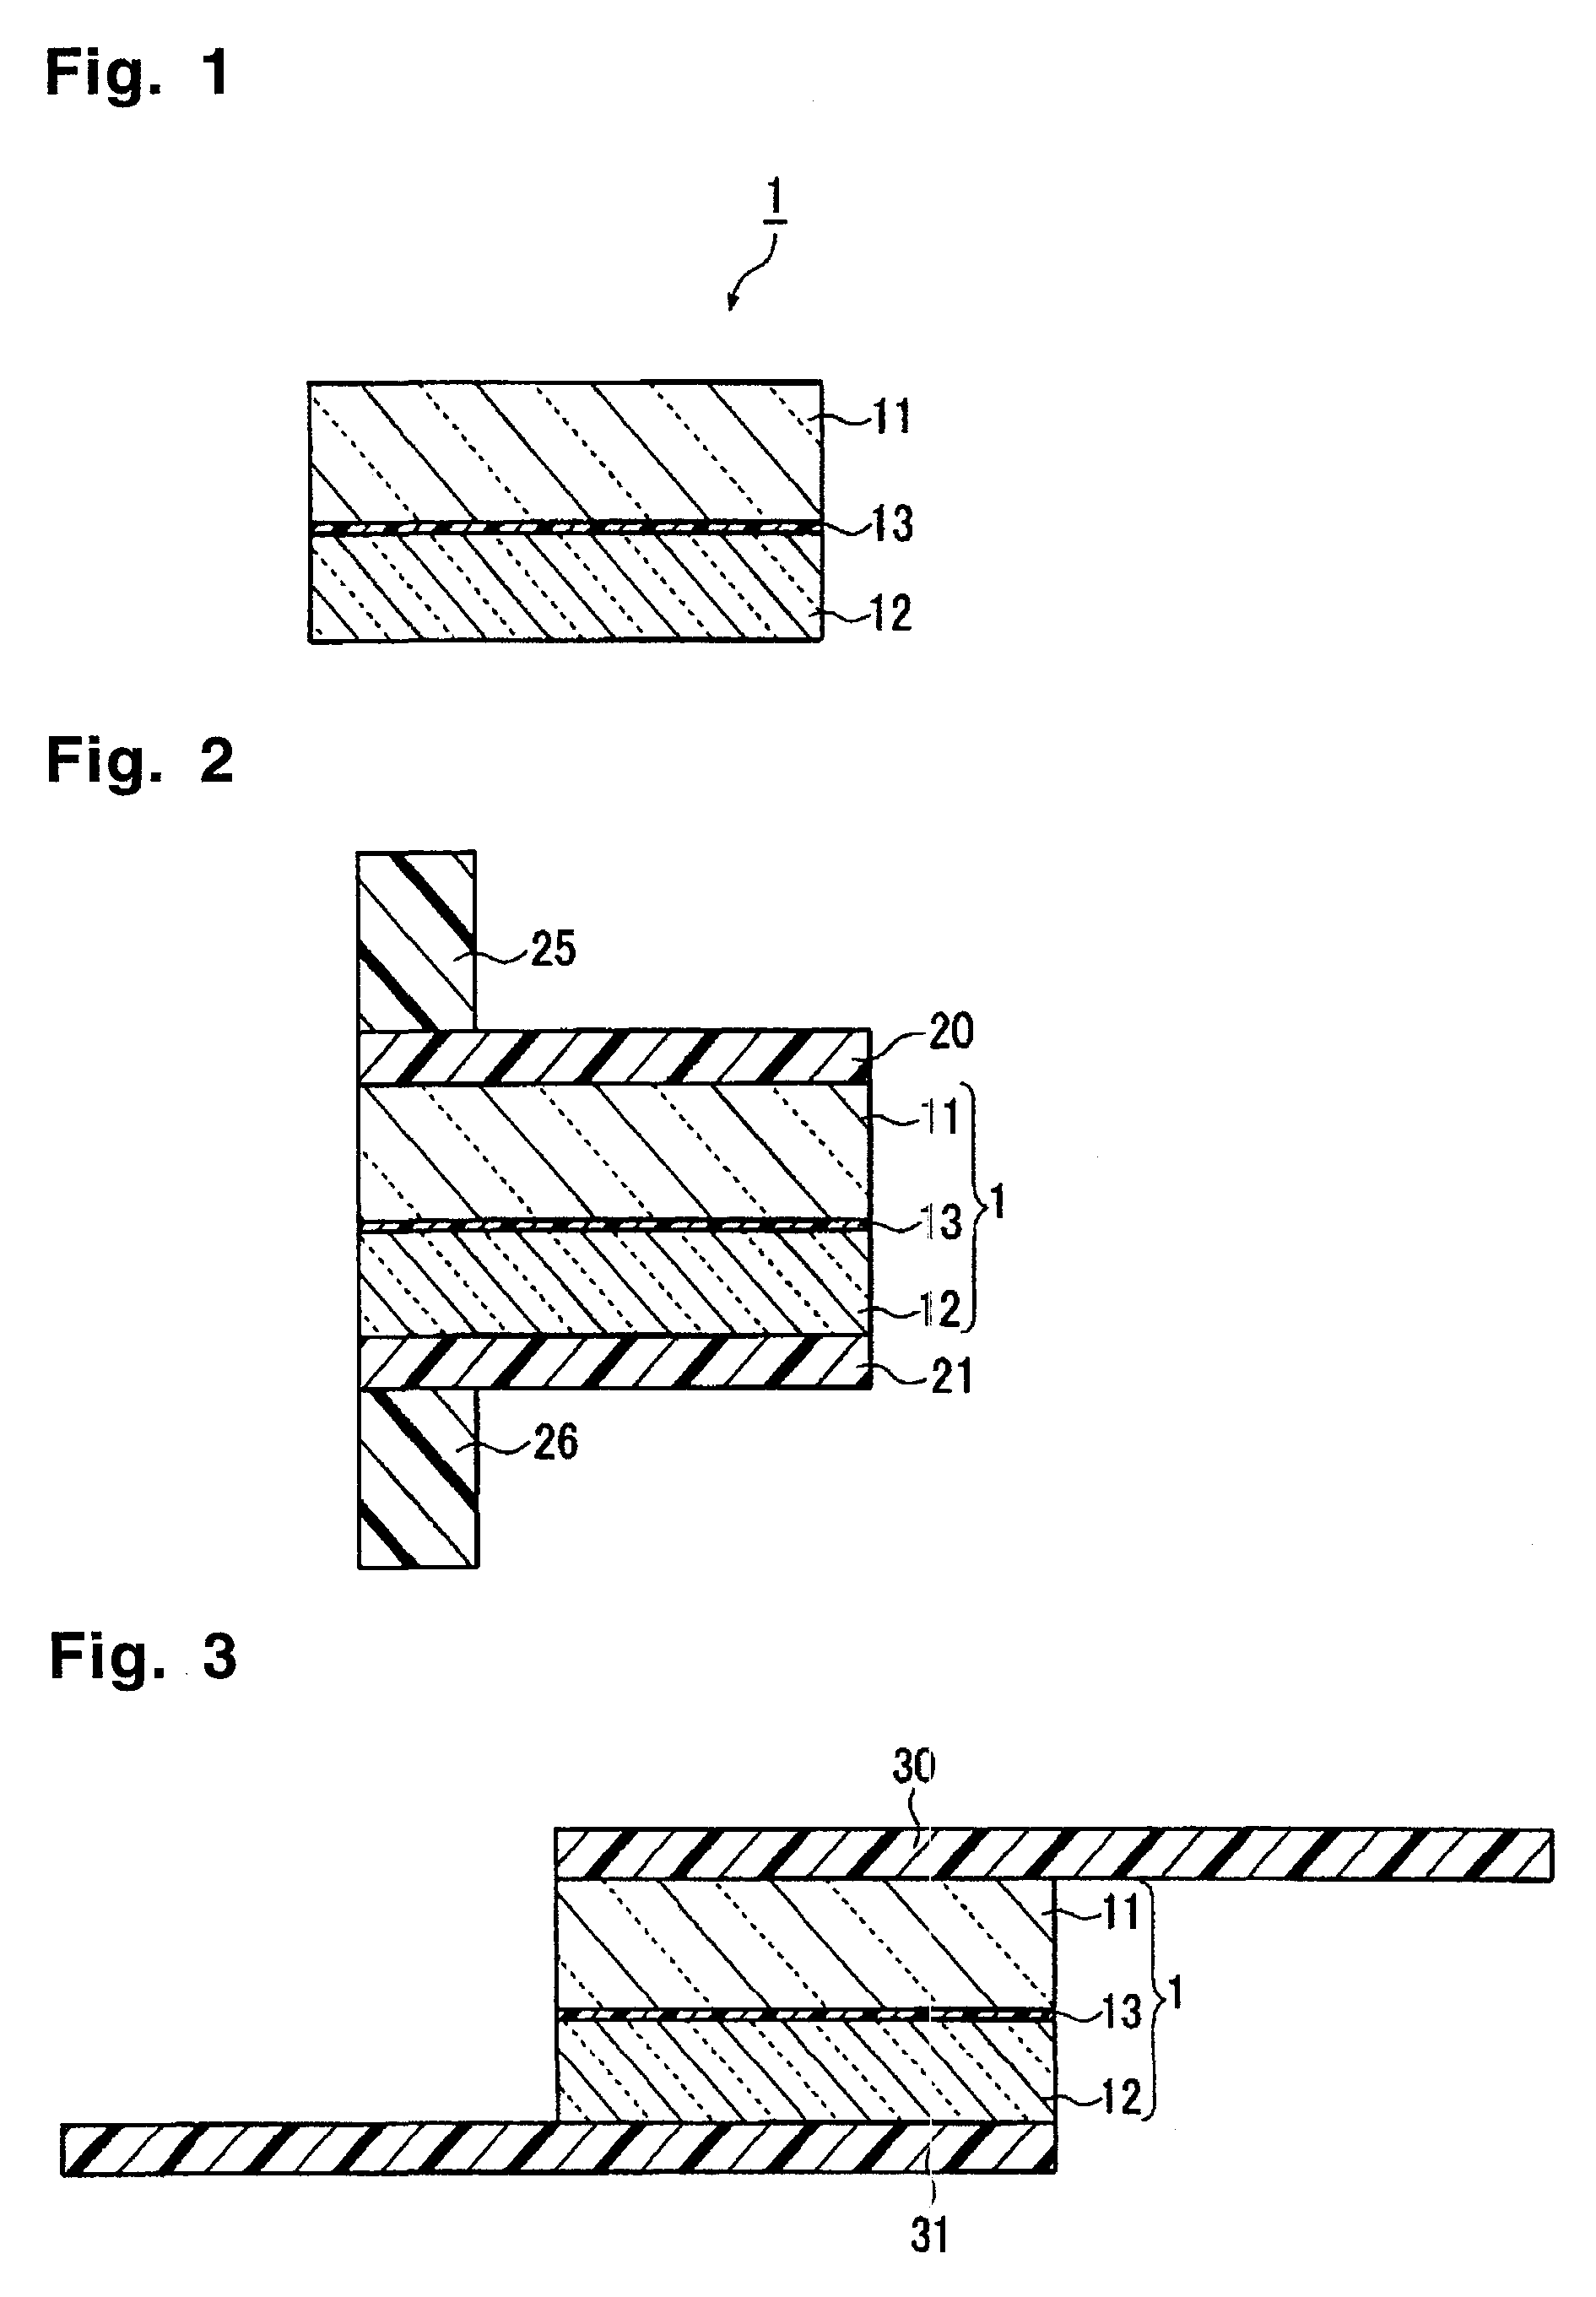 Glass substrate with protective glass, process for producing display device using glass substrate with protective glass, and silicone for release paper